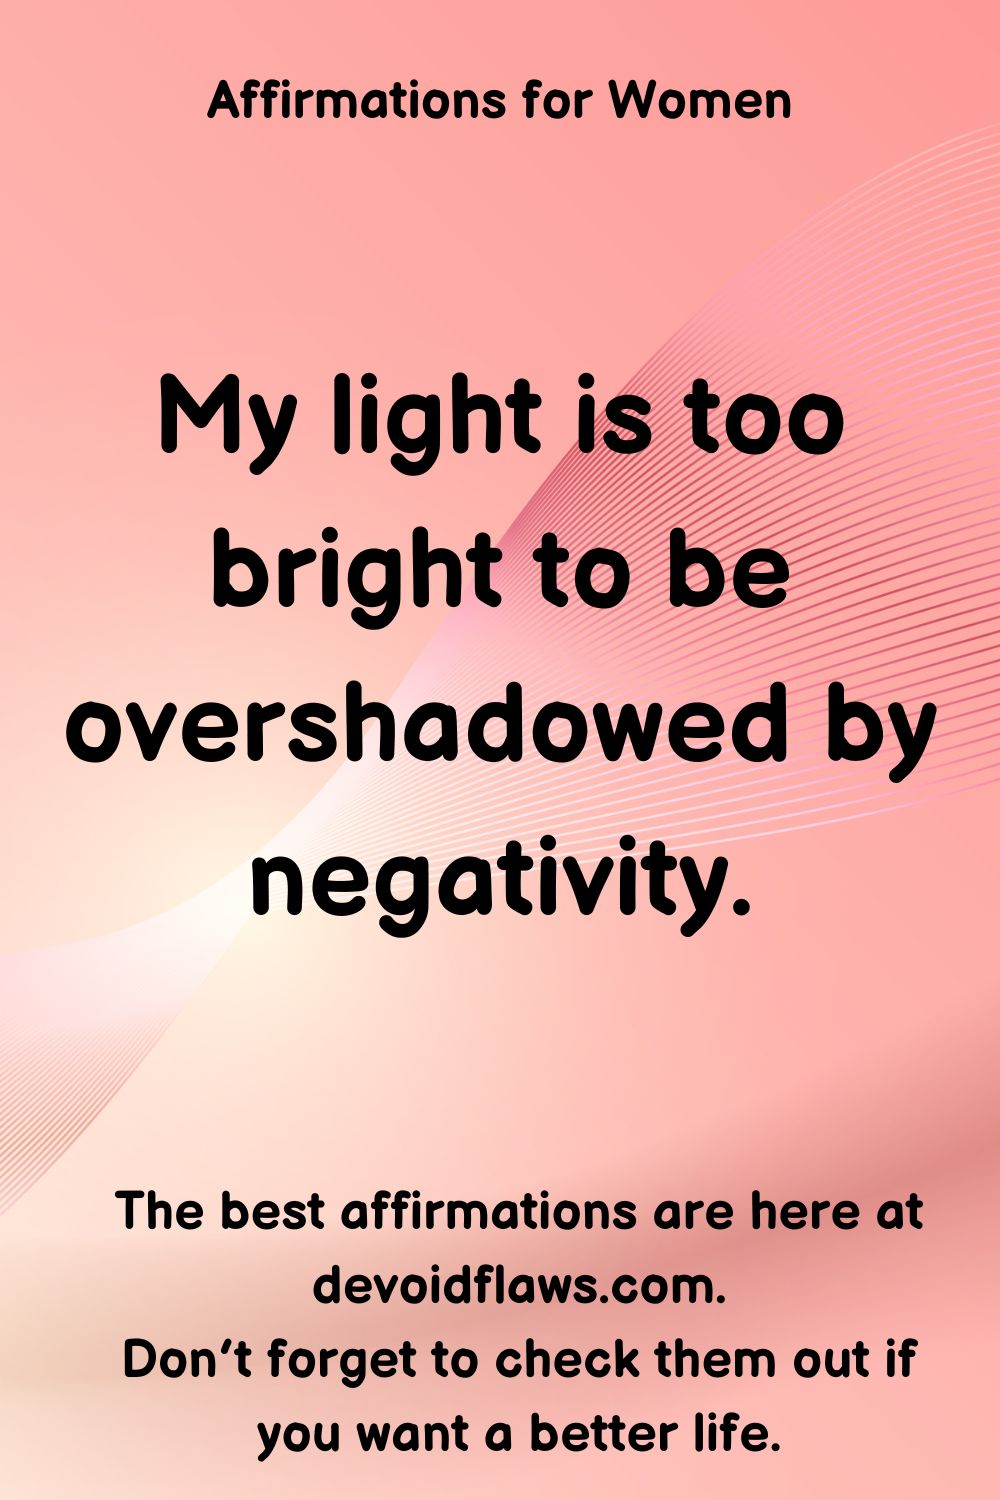 100 Affirmations for Women to Use Daily